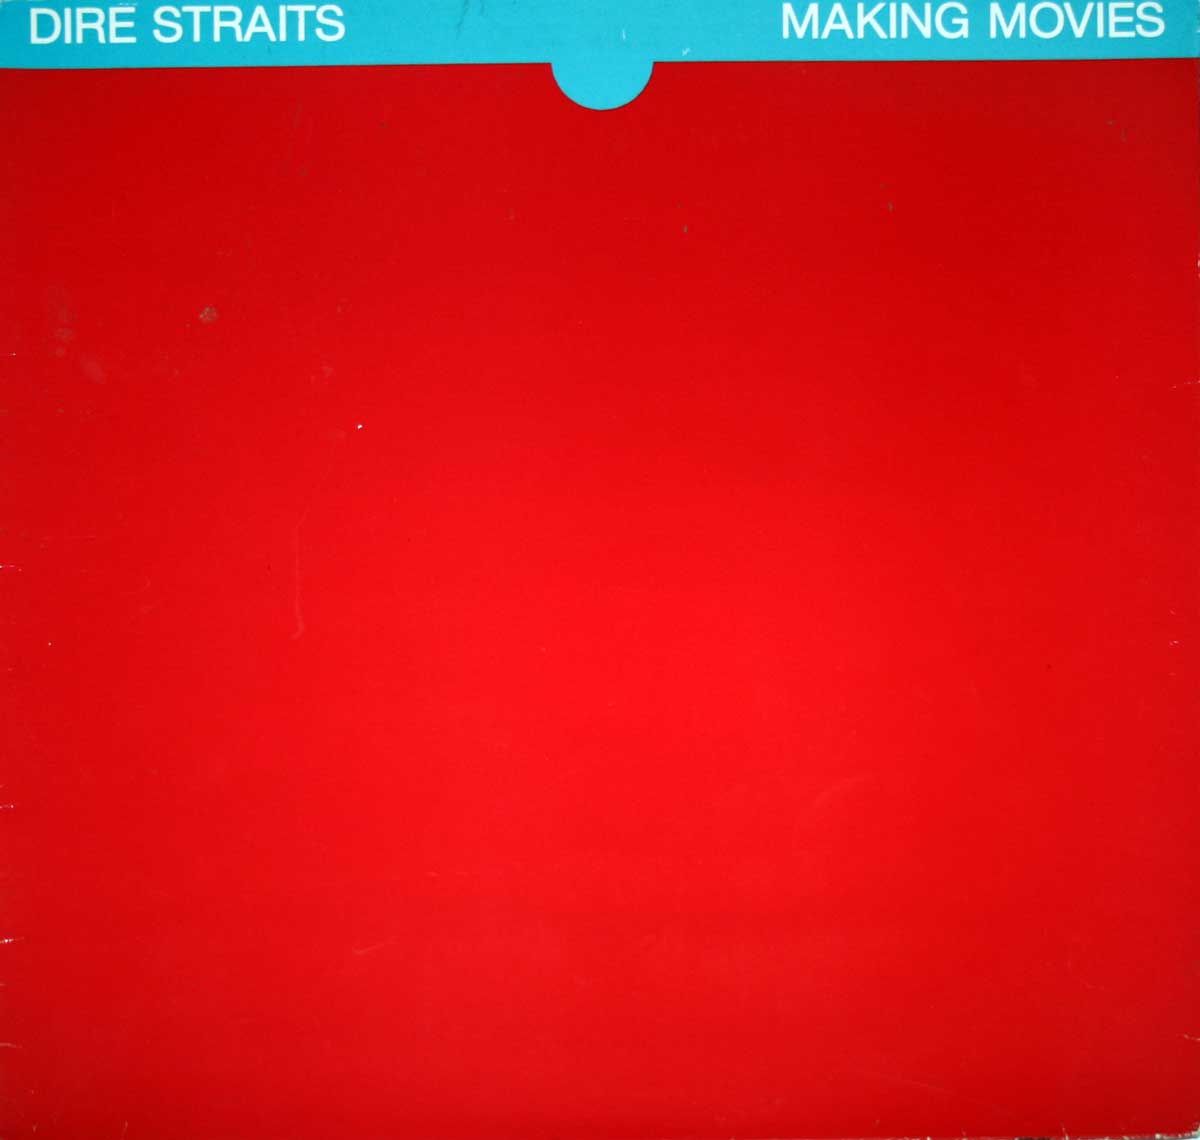 Album Front cover photo of German release of Dire Straits Making Movies